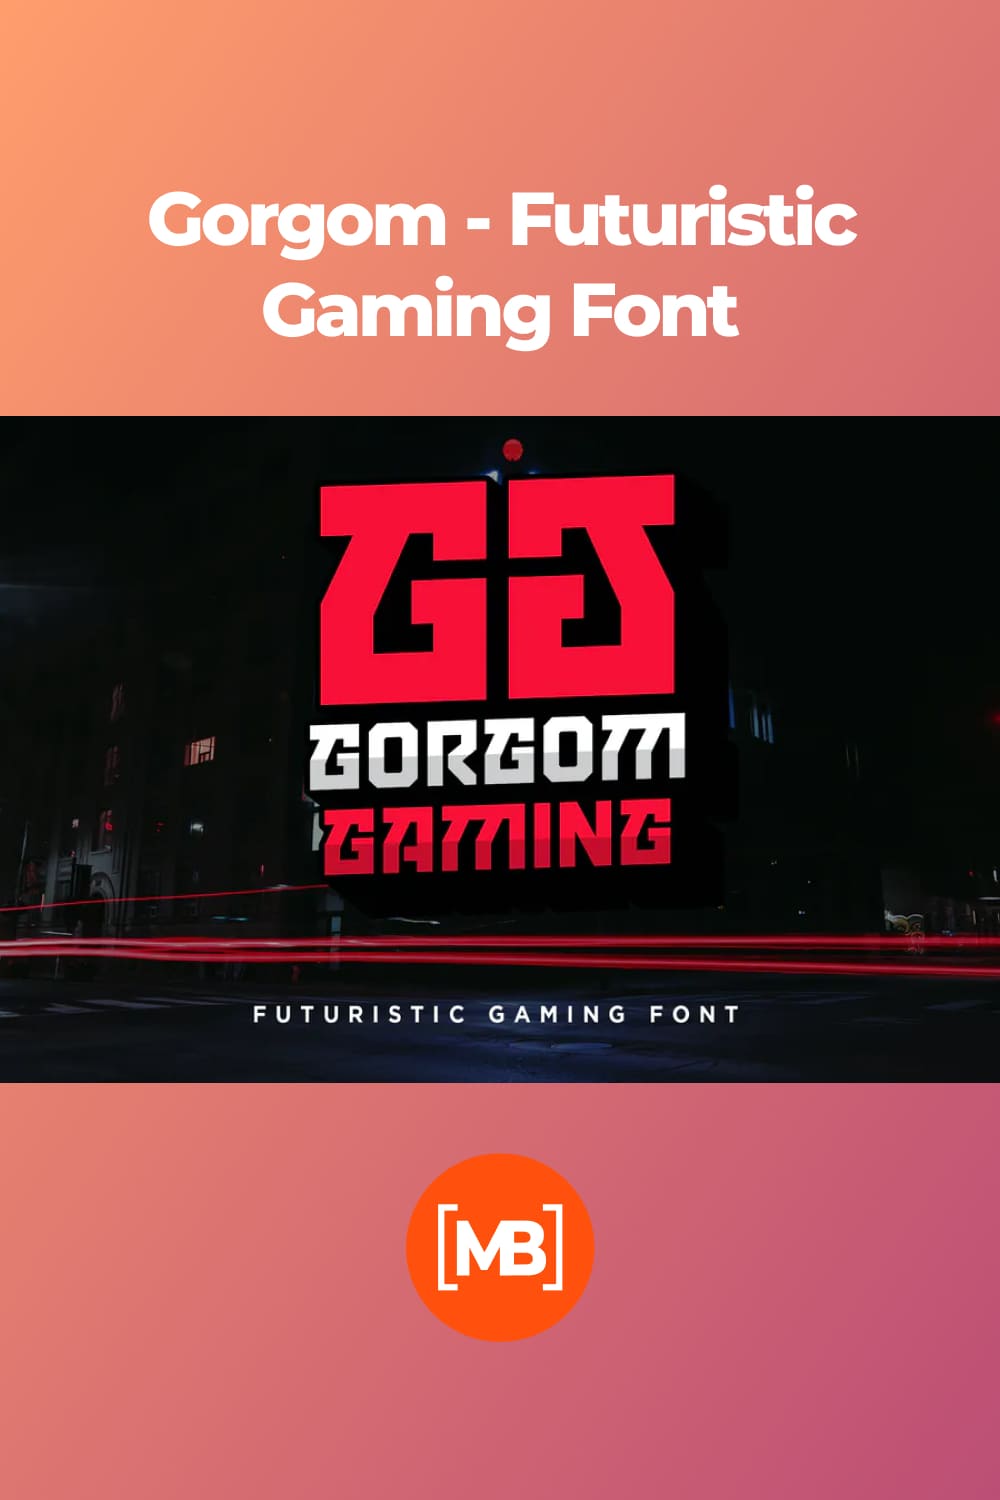 This is a futuristic game font specially designed for digital now and in the future for your design needs.